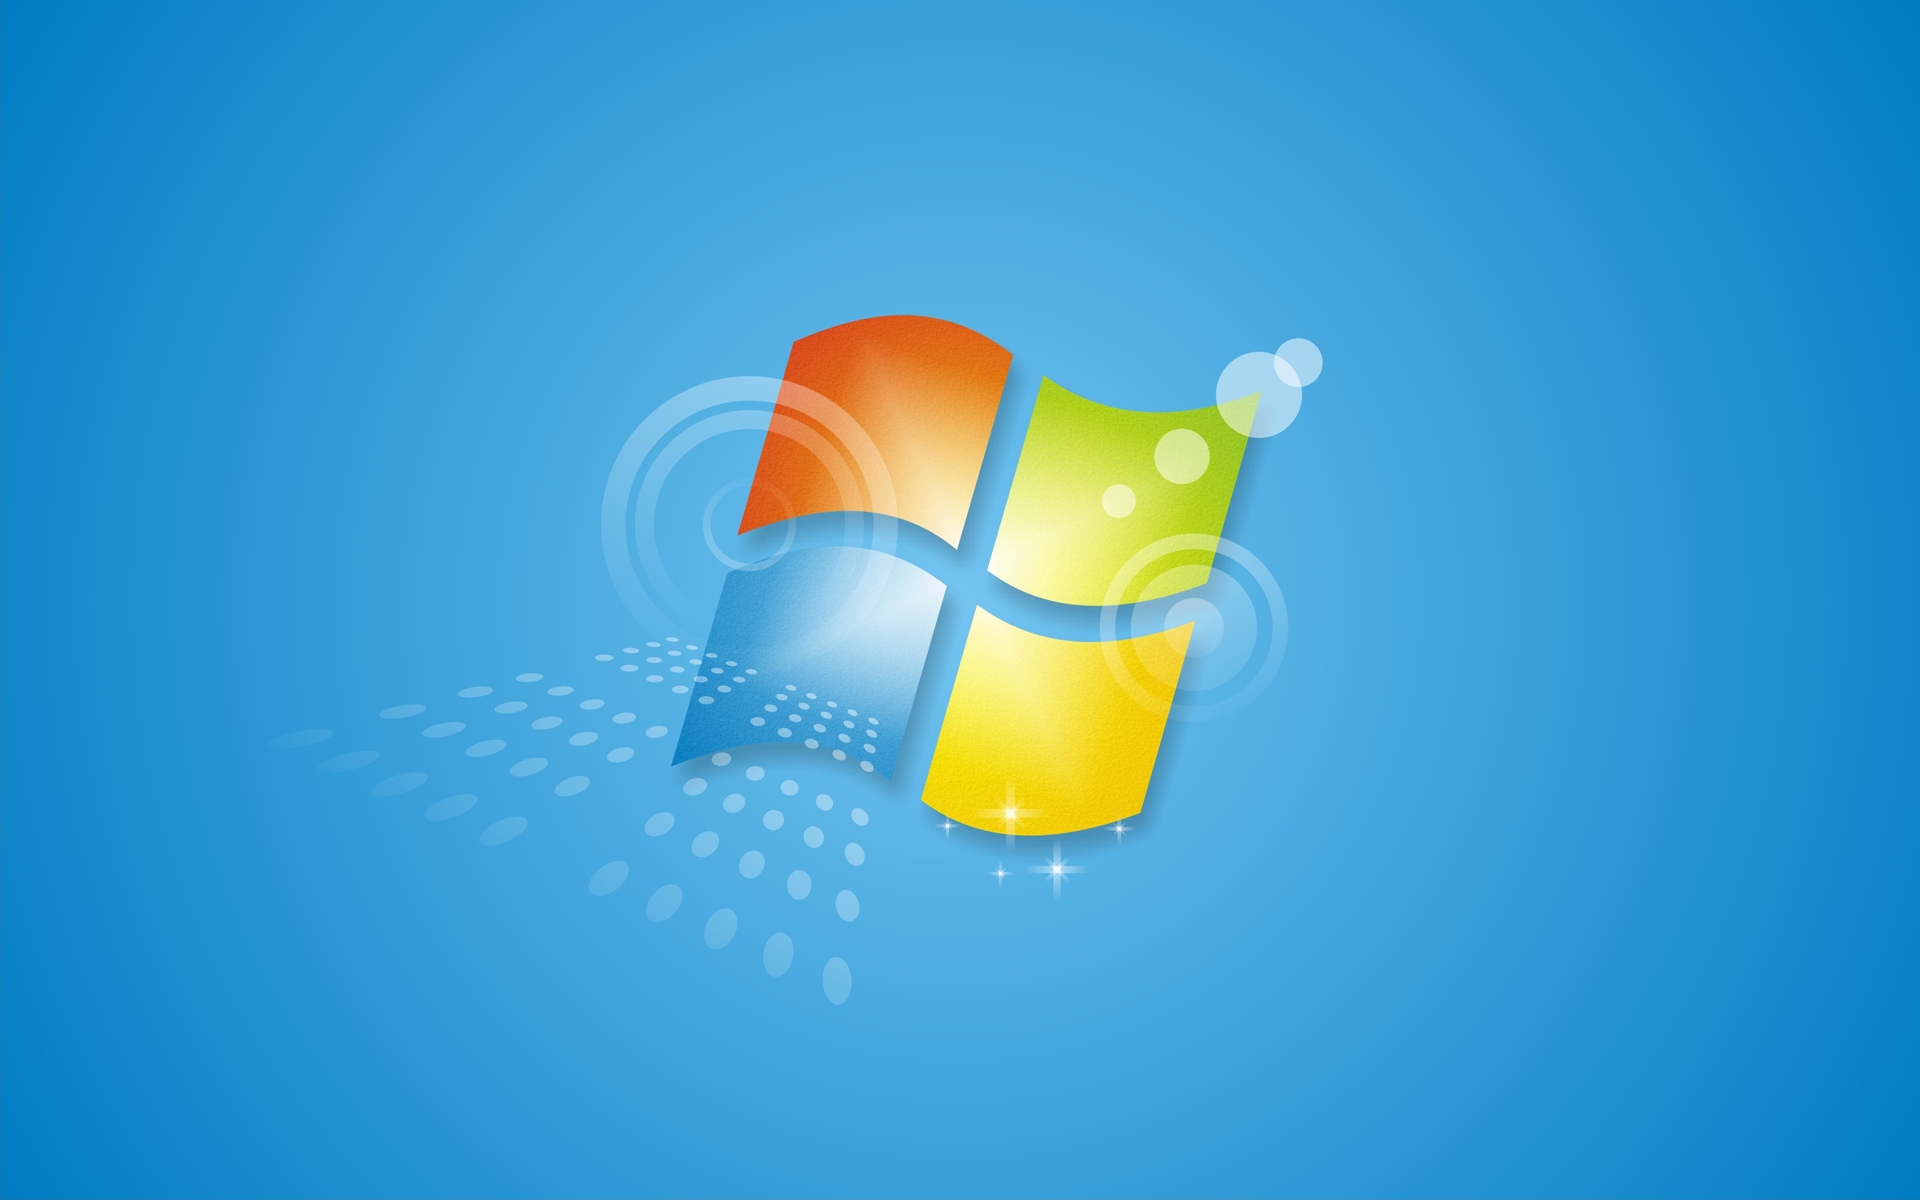 Windows 7 users start to decline as Windows 10 reaches all-time high